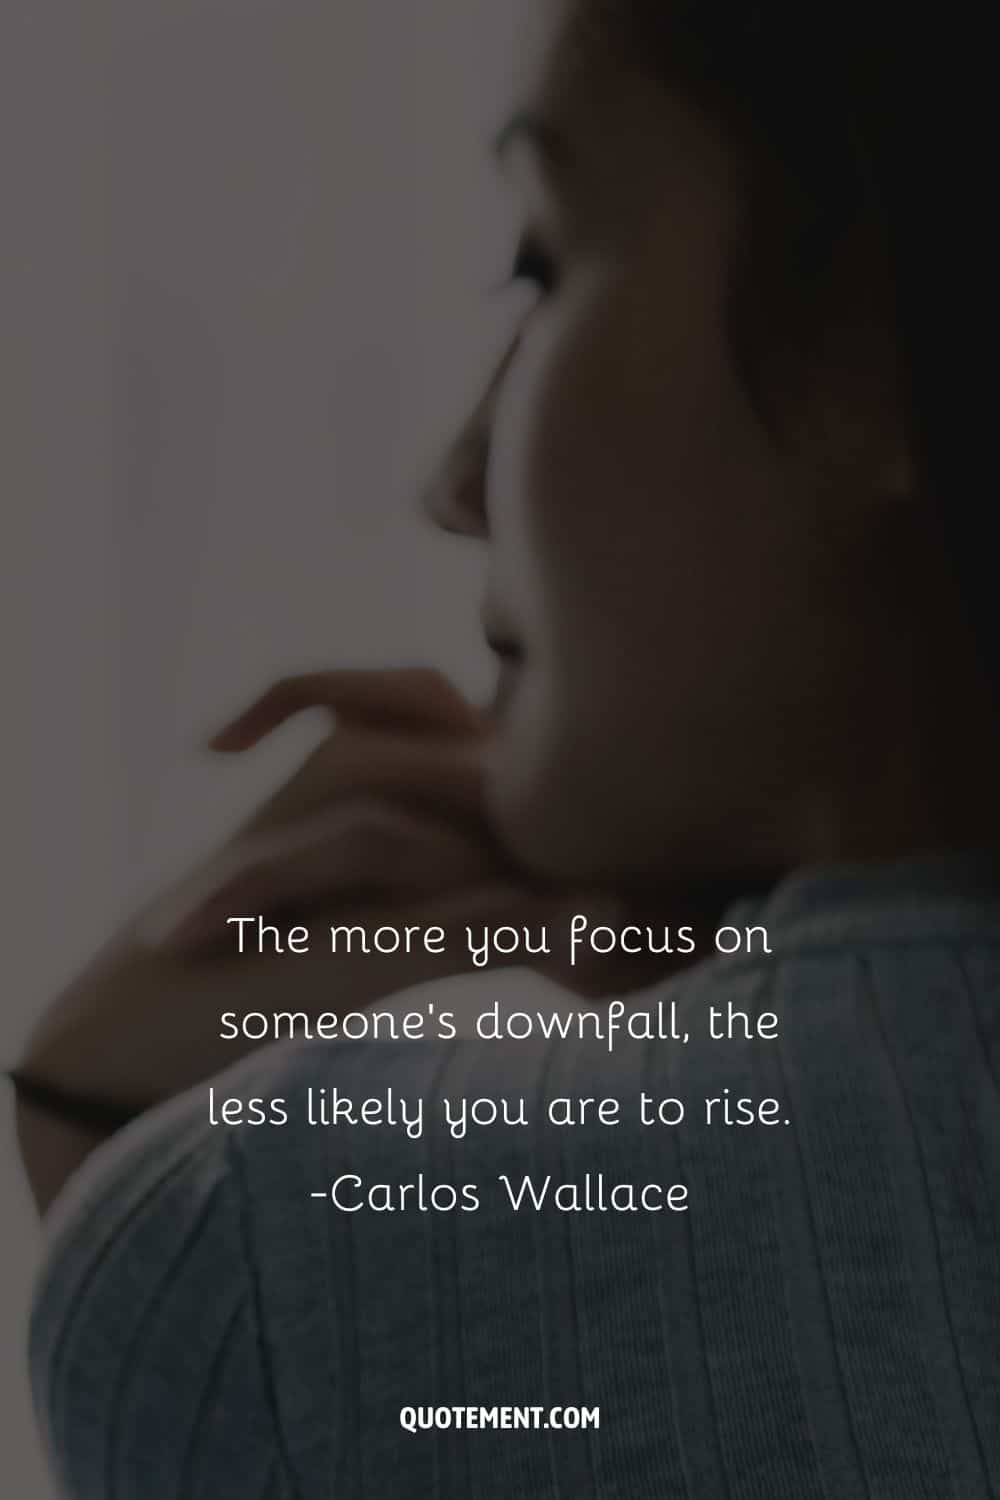 The more you focus on someone's downfall, the less likely you are to rise